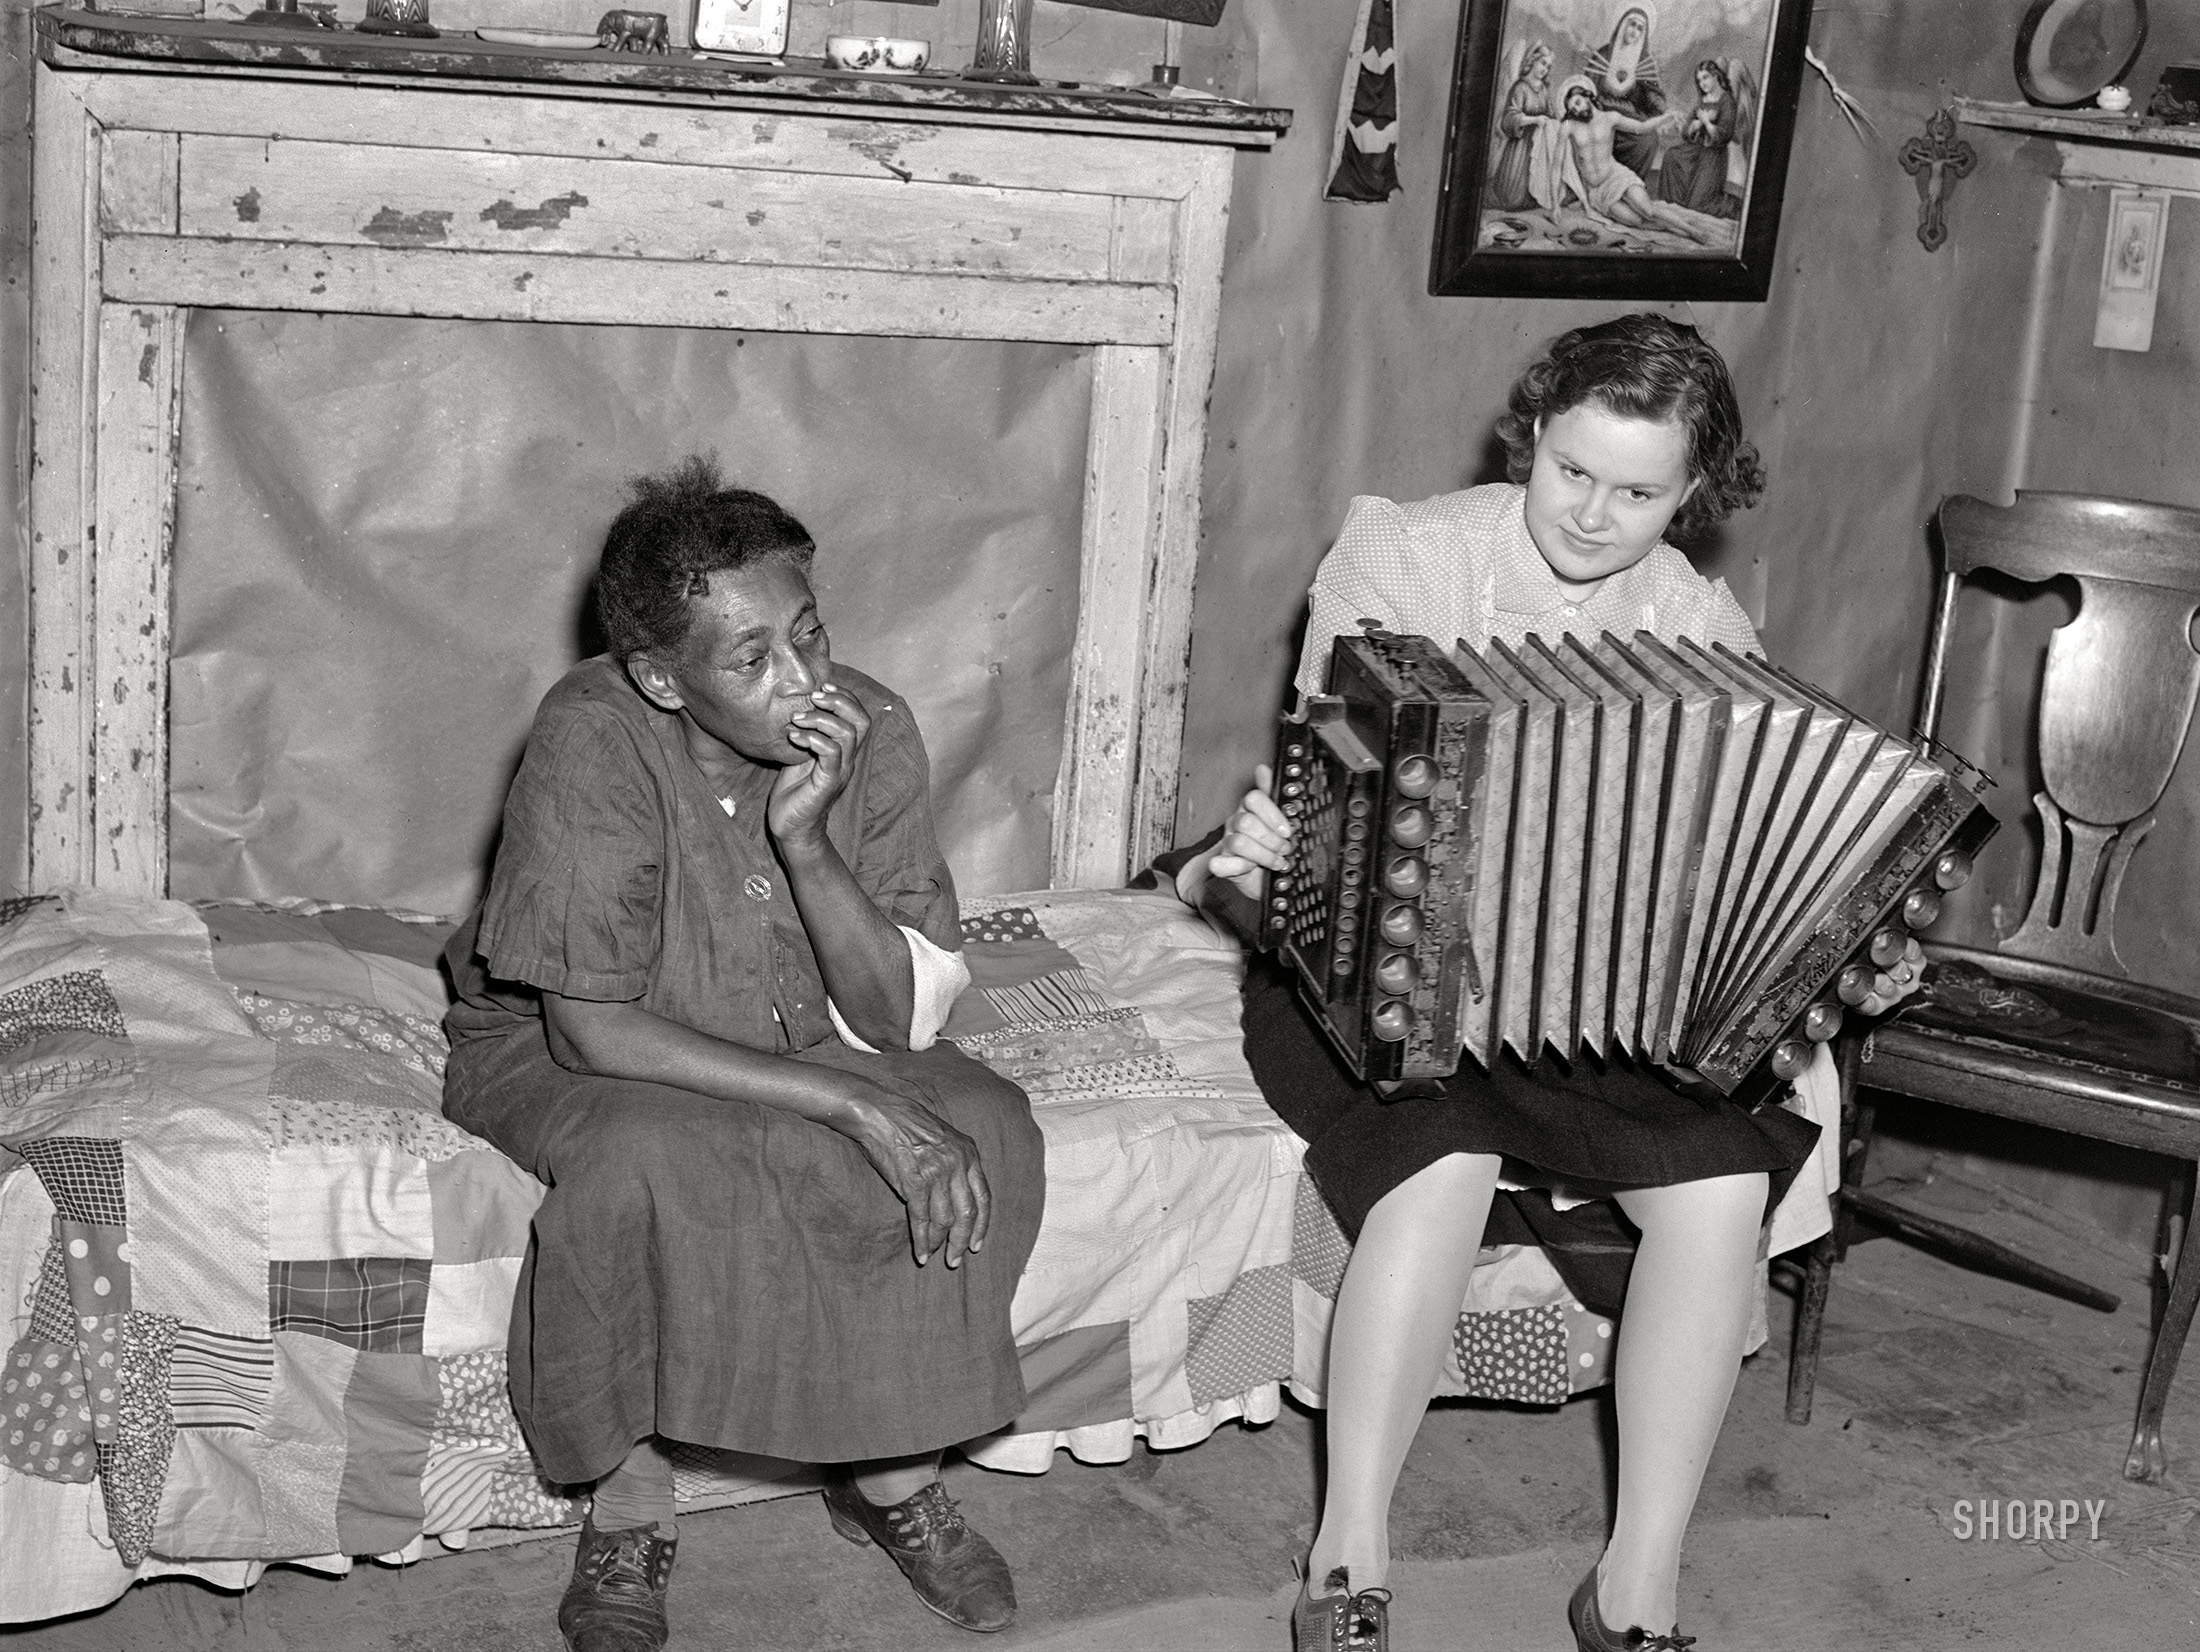 September 1940. St. Mary's County, Maryland. An uncaptioned photo by John Vachon showing Louise Dyson (last seen here with her husband) and unidentified guest playing Mr. Dyson's ancient accordion. Laissez le bon temps rouler! View full size.